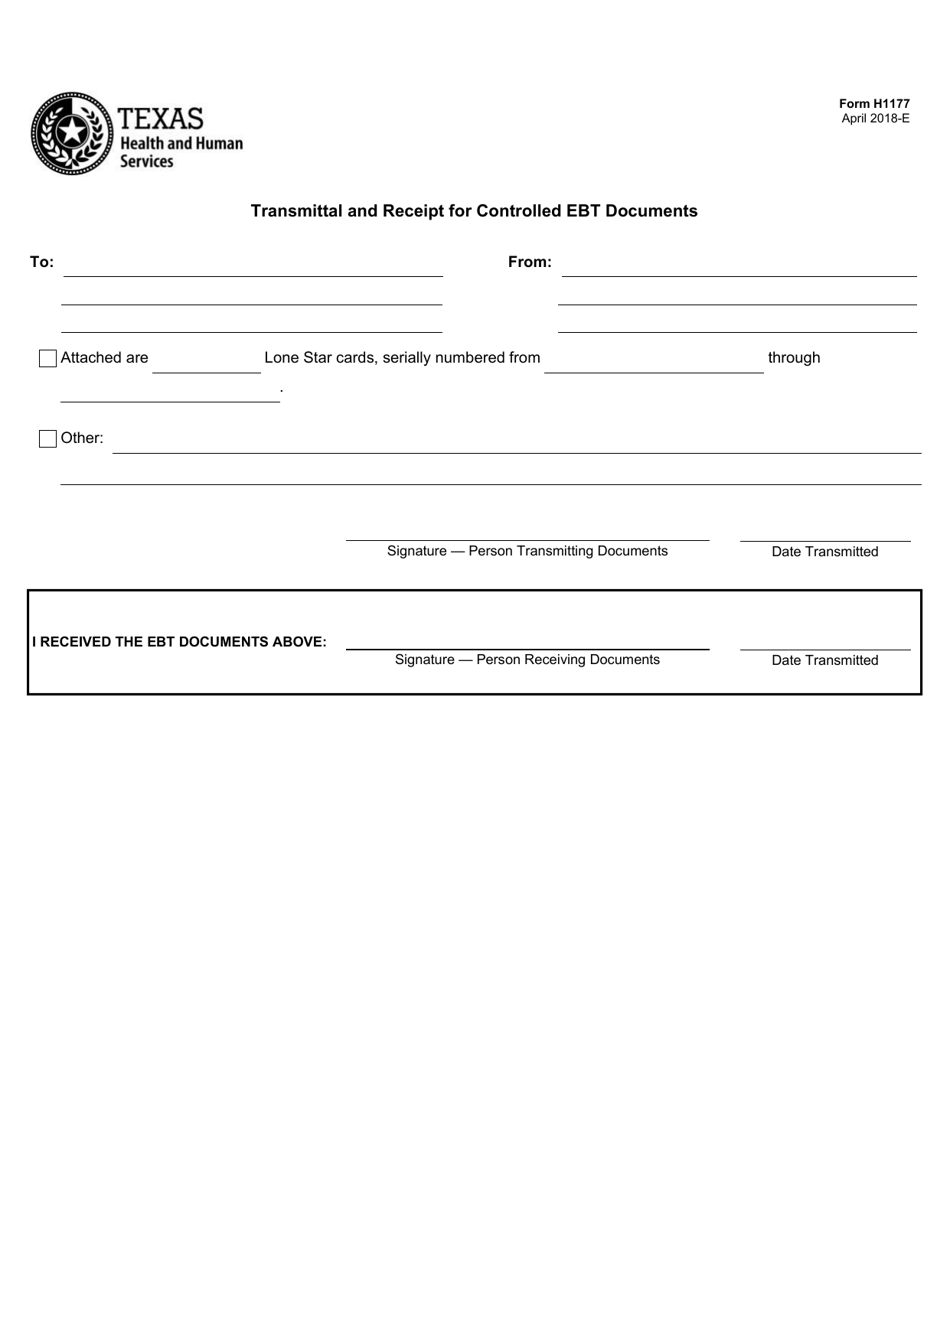 Form H1177 Transmittal and Receipt for Controlled Ebt Documents - Texas, Page 1